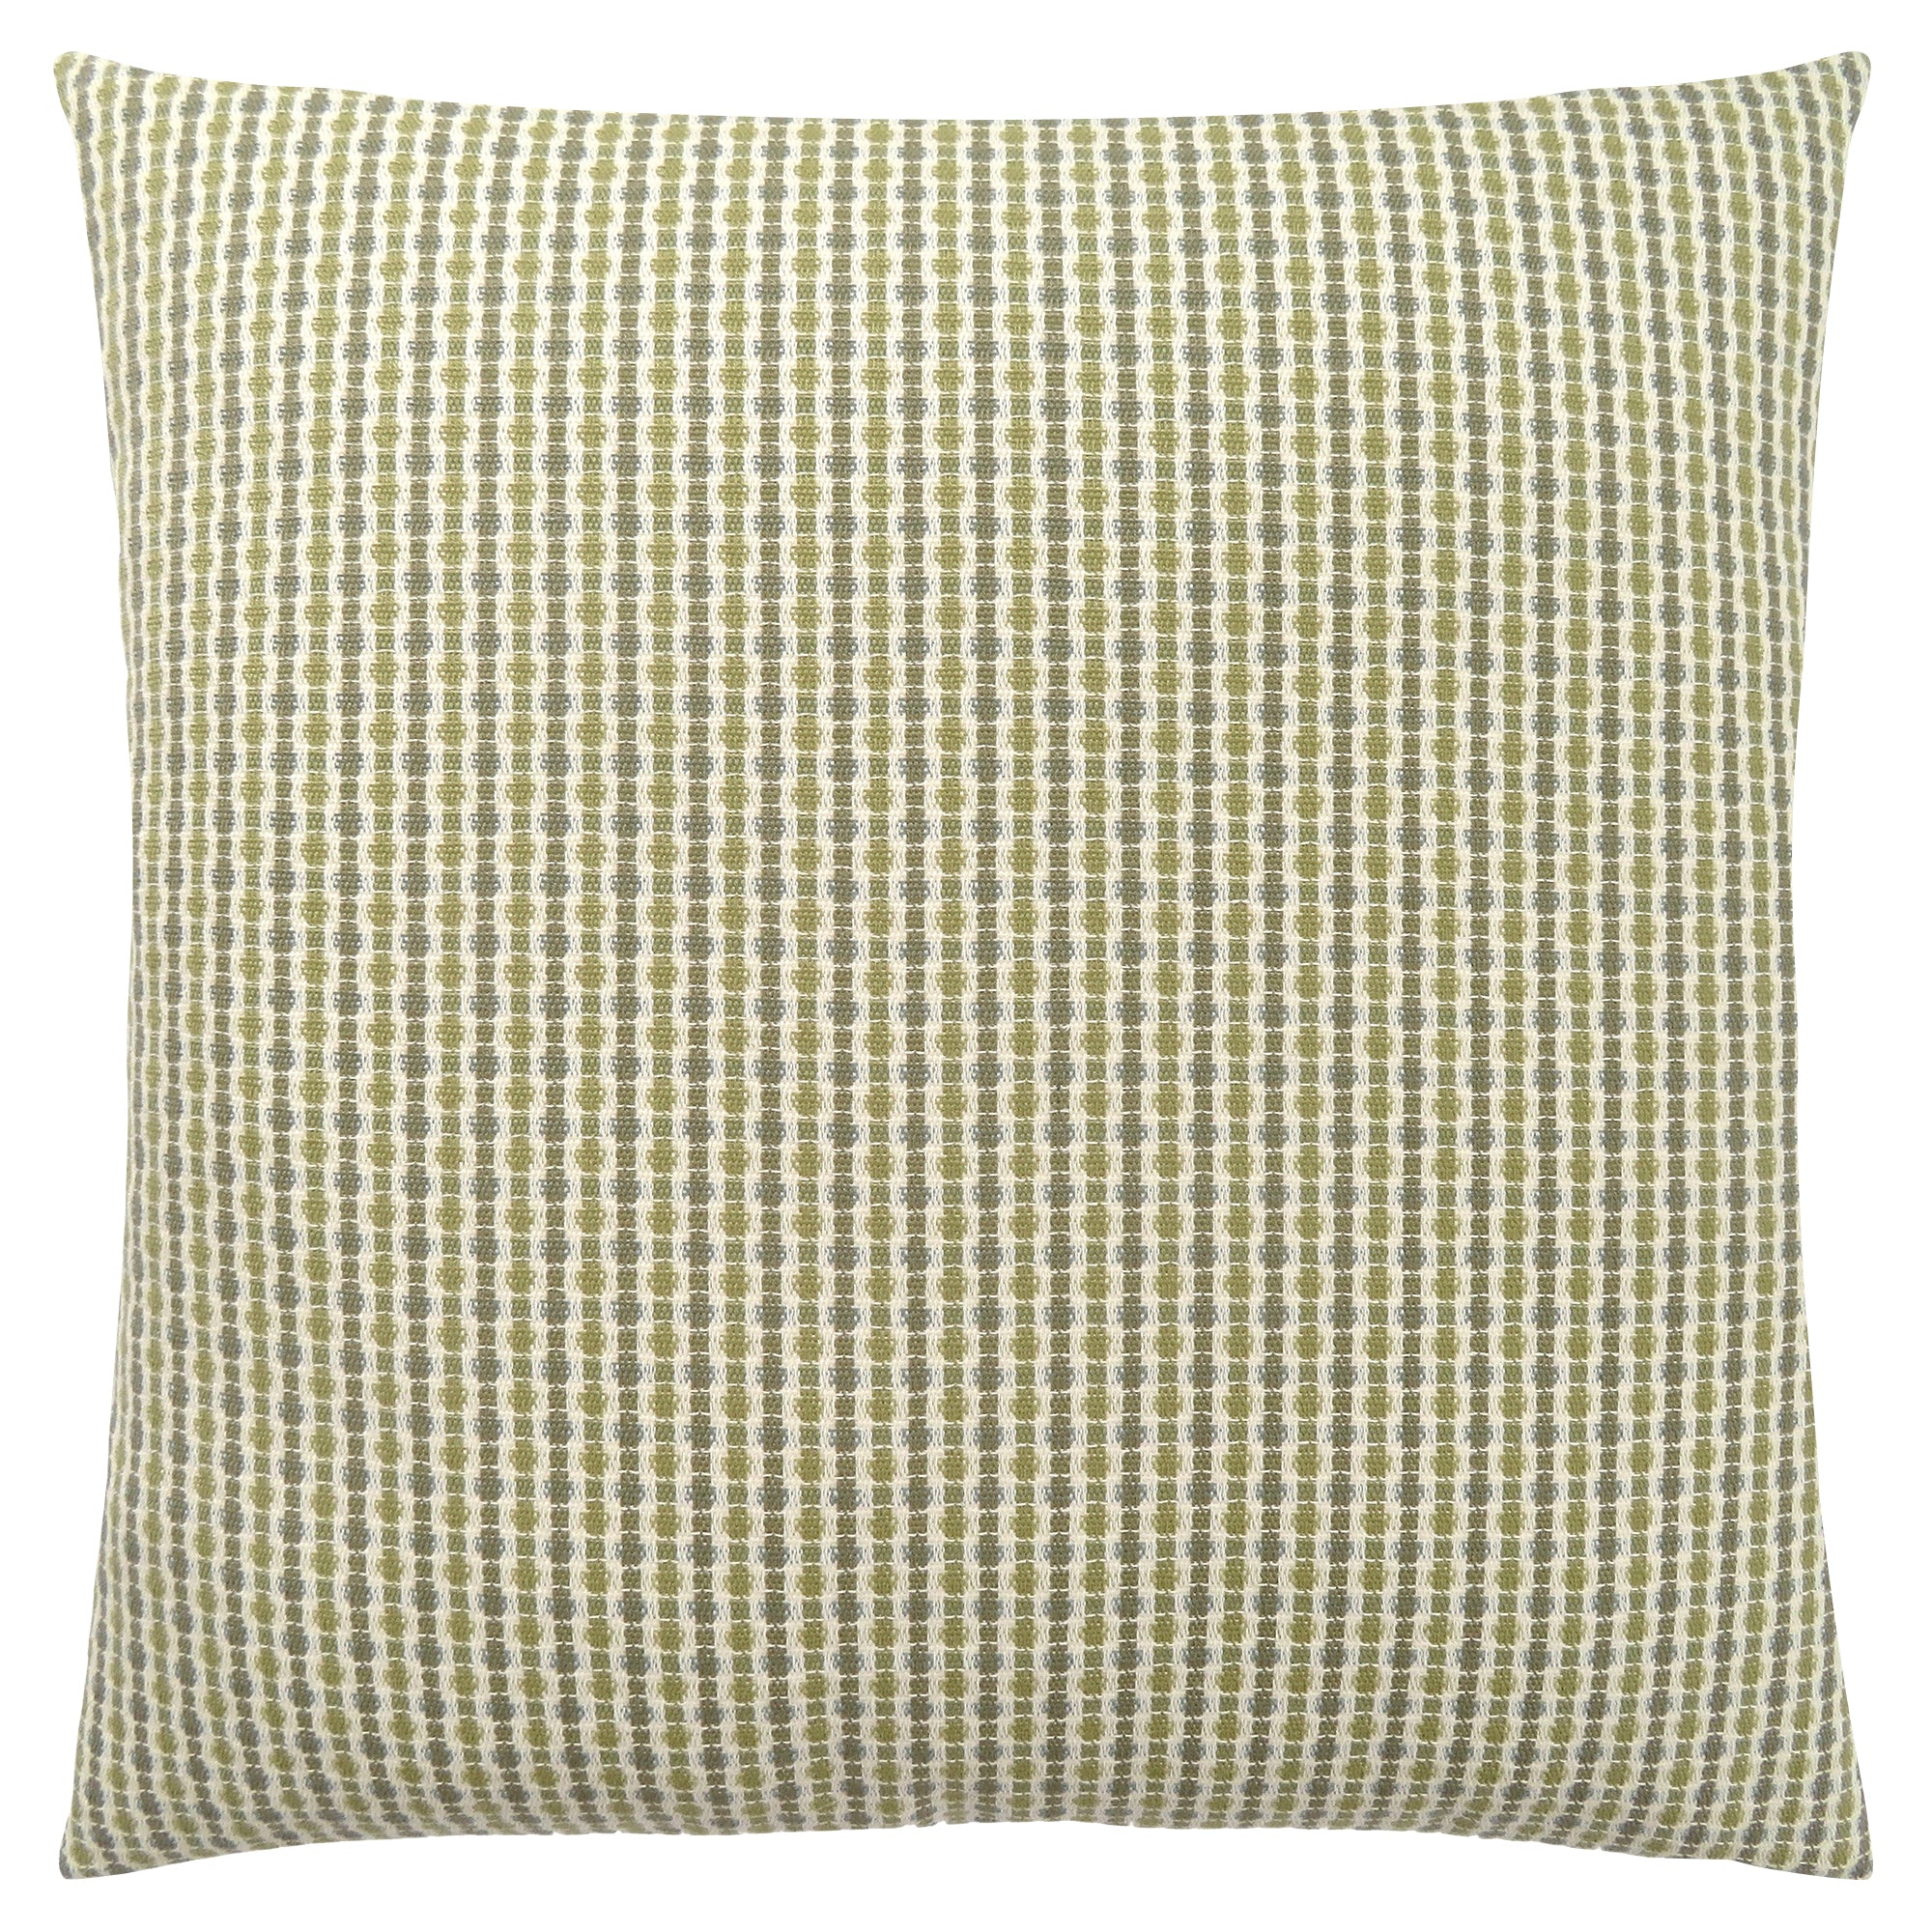 MN-449232    Pillows, 18 X 18 Square, Insert Included, Decorative Throw, Accent, Sofa, Couch, Bed, Soft Polyester Woven Fabric, Hypoallergenic Soft Polyester Insert, Light And Dark Green, Abstract Dot Design, Classic Dot Design, Classic